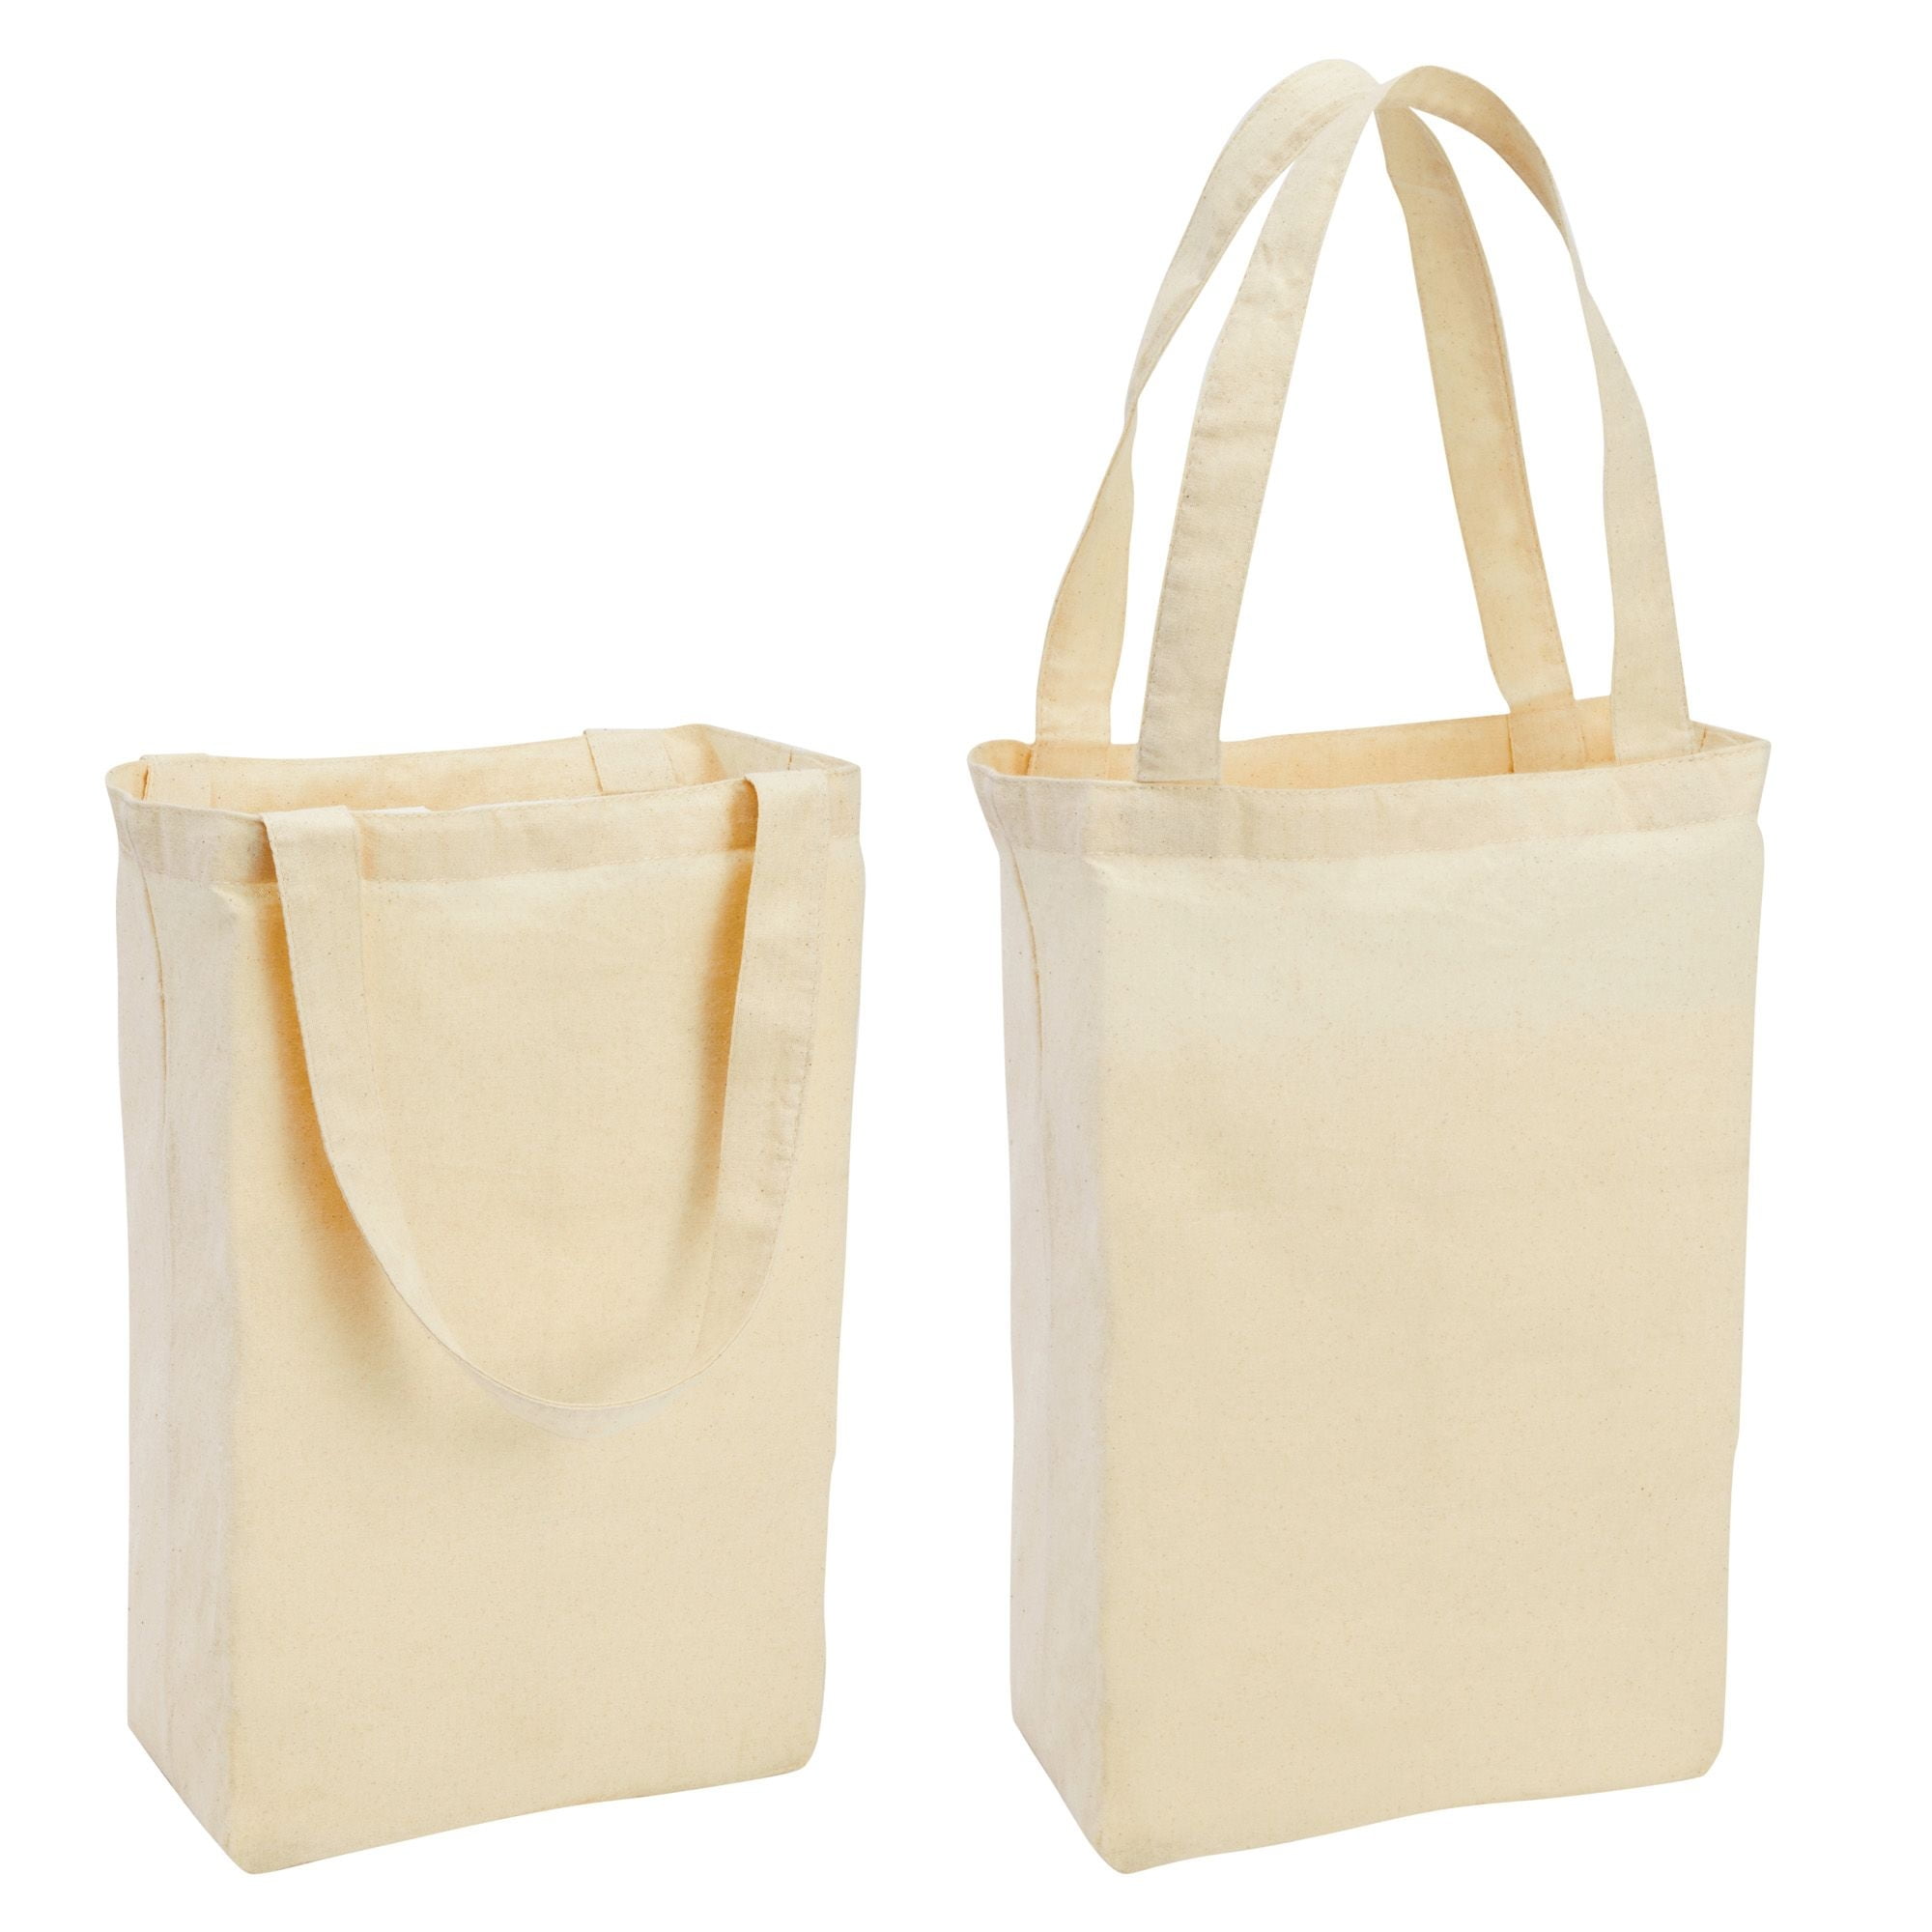 Draw blank Canvas Tote Bags. 24 Pack Suitable for DIY, foldable